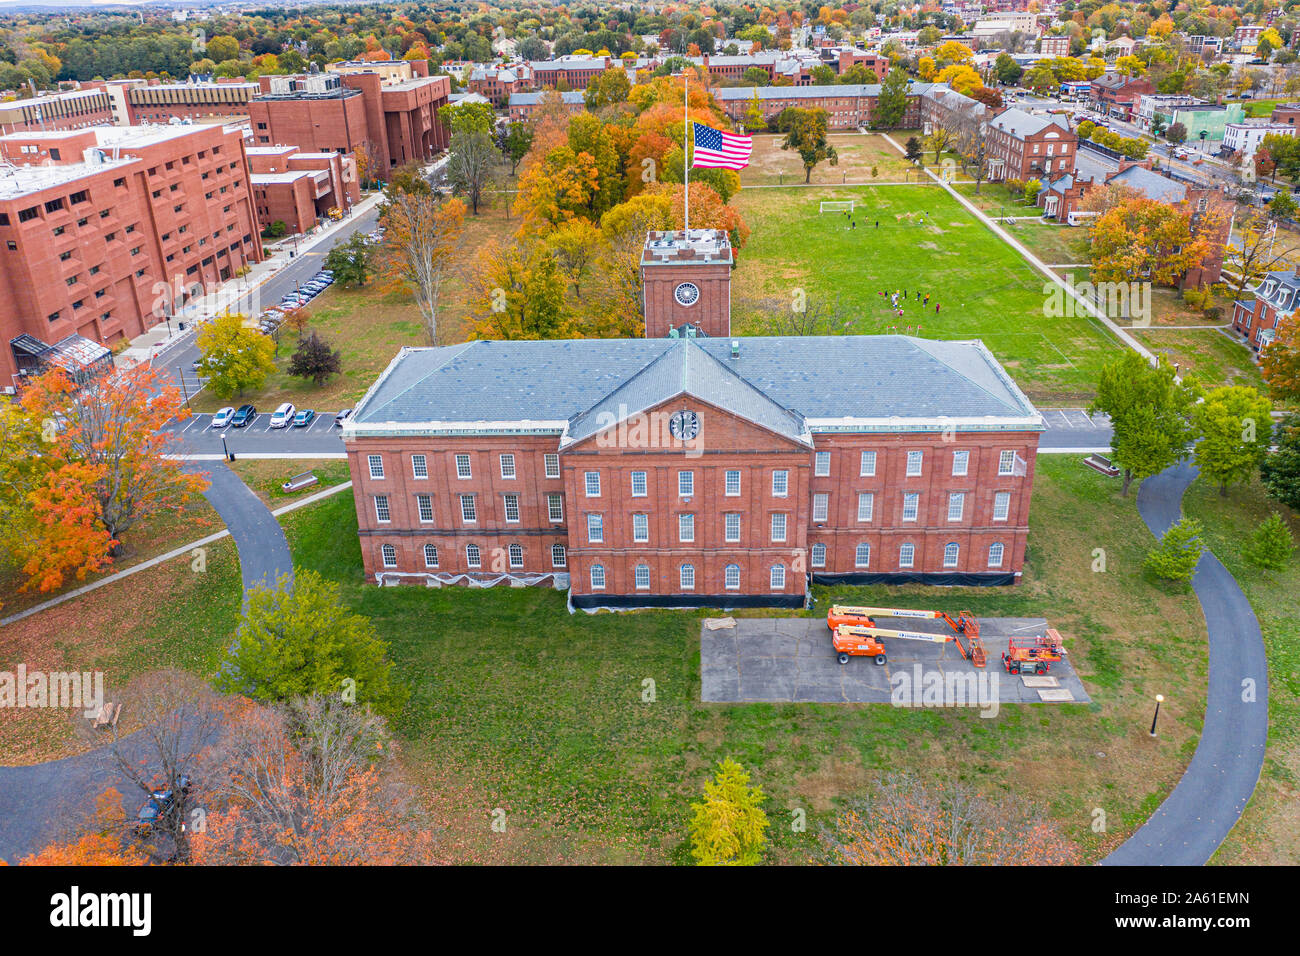 Springfield Armory National Historic Site, Springfield, Massachusetts, USA Banque D'Images